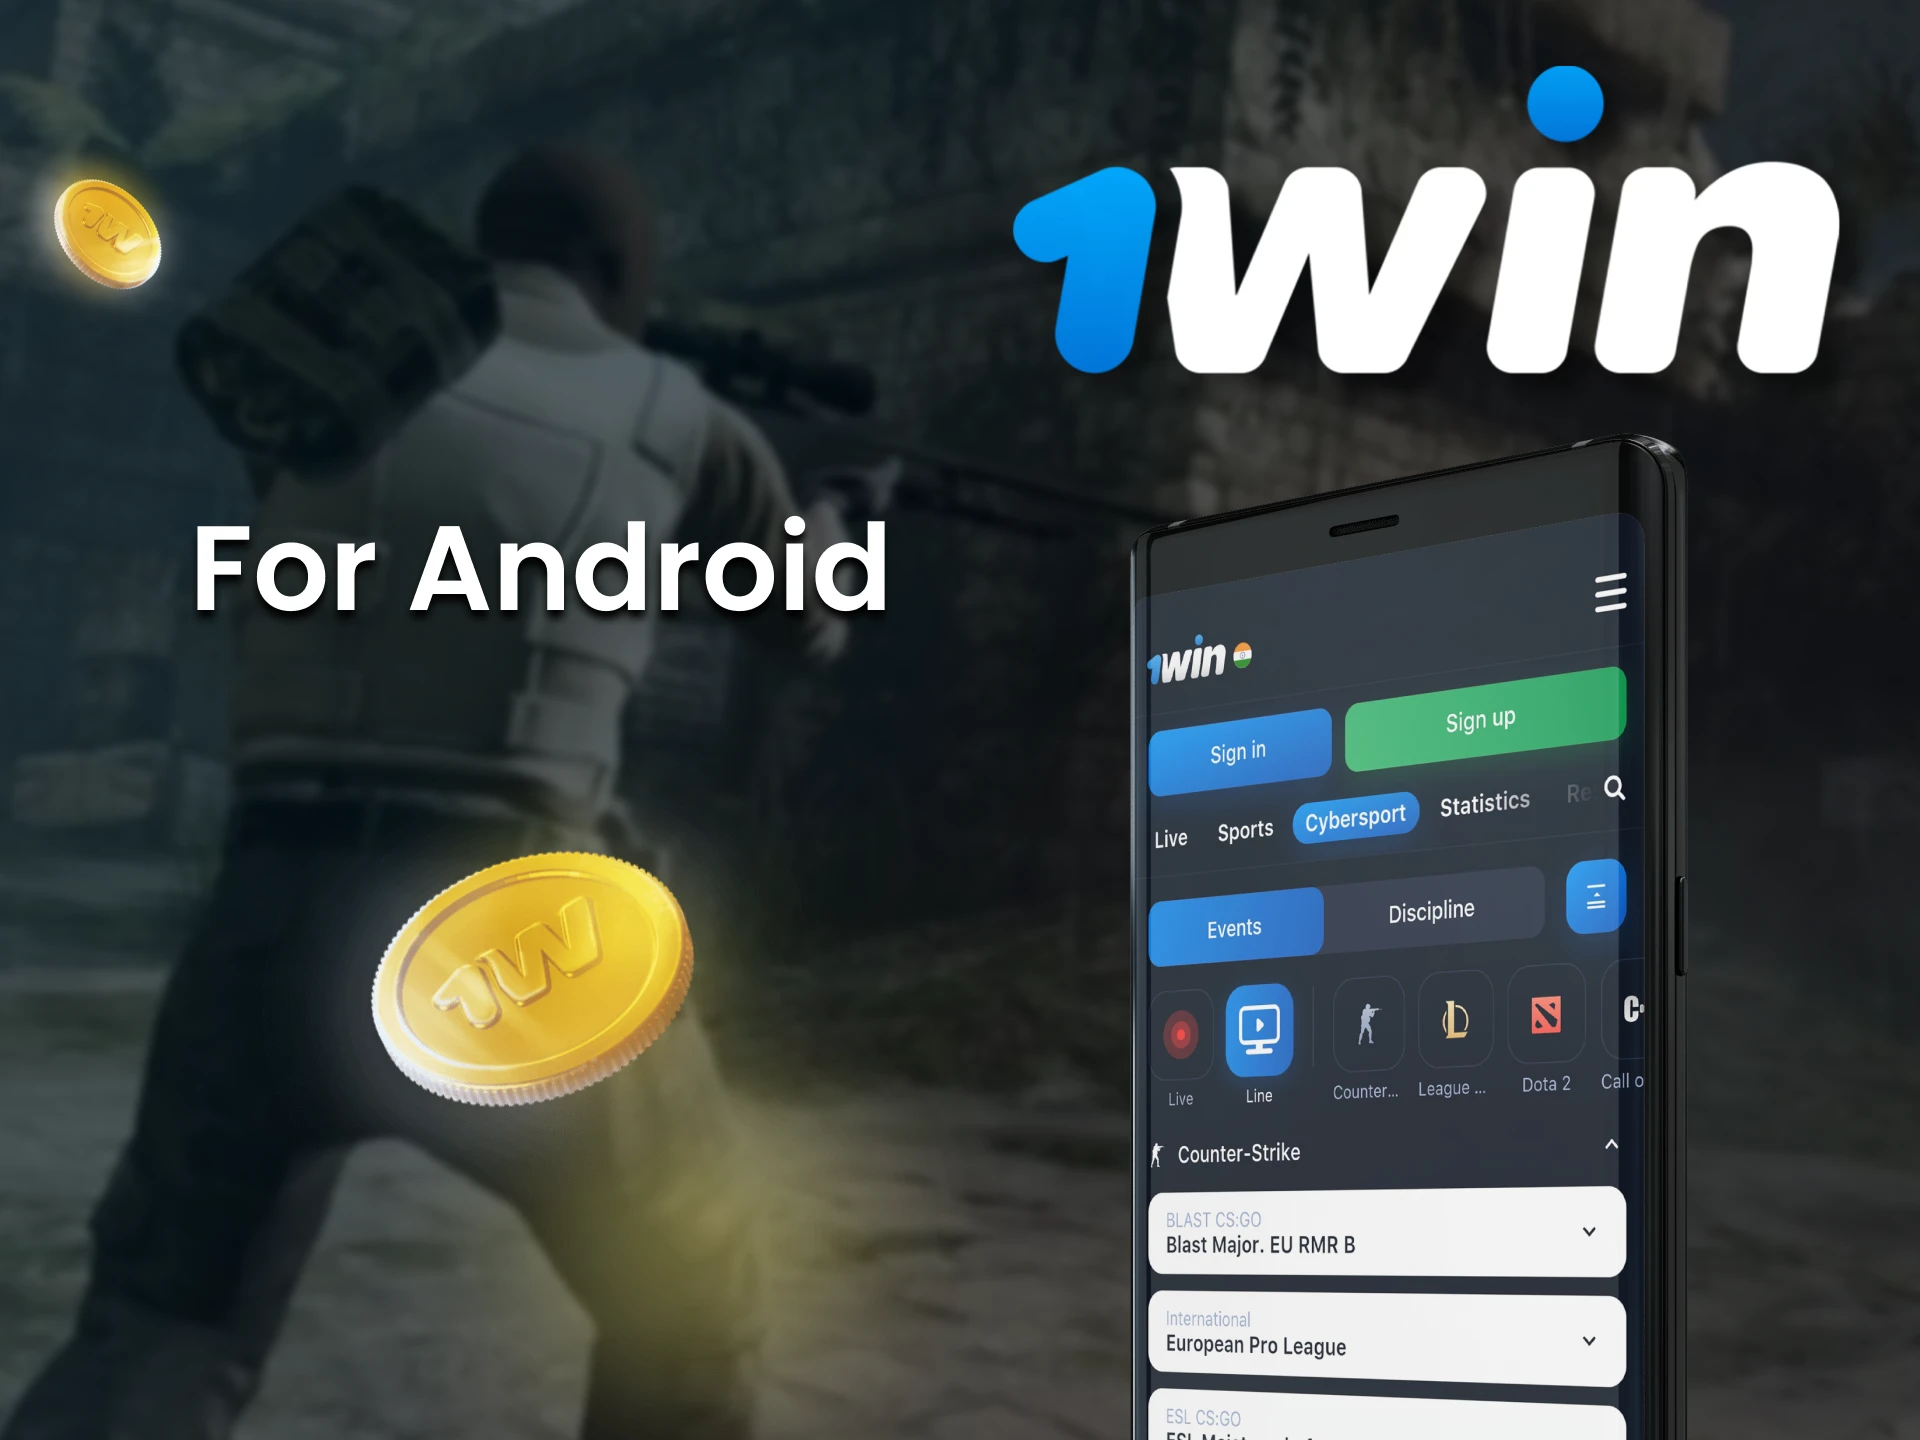 Bet on esports with the 1win Android app.